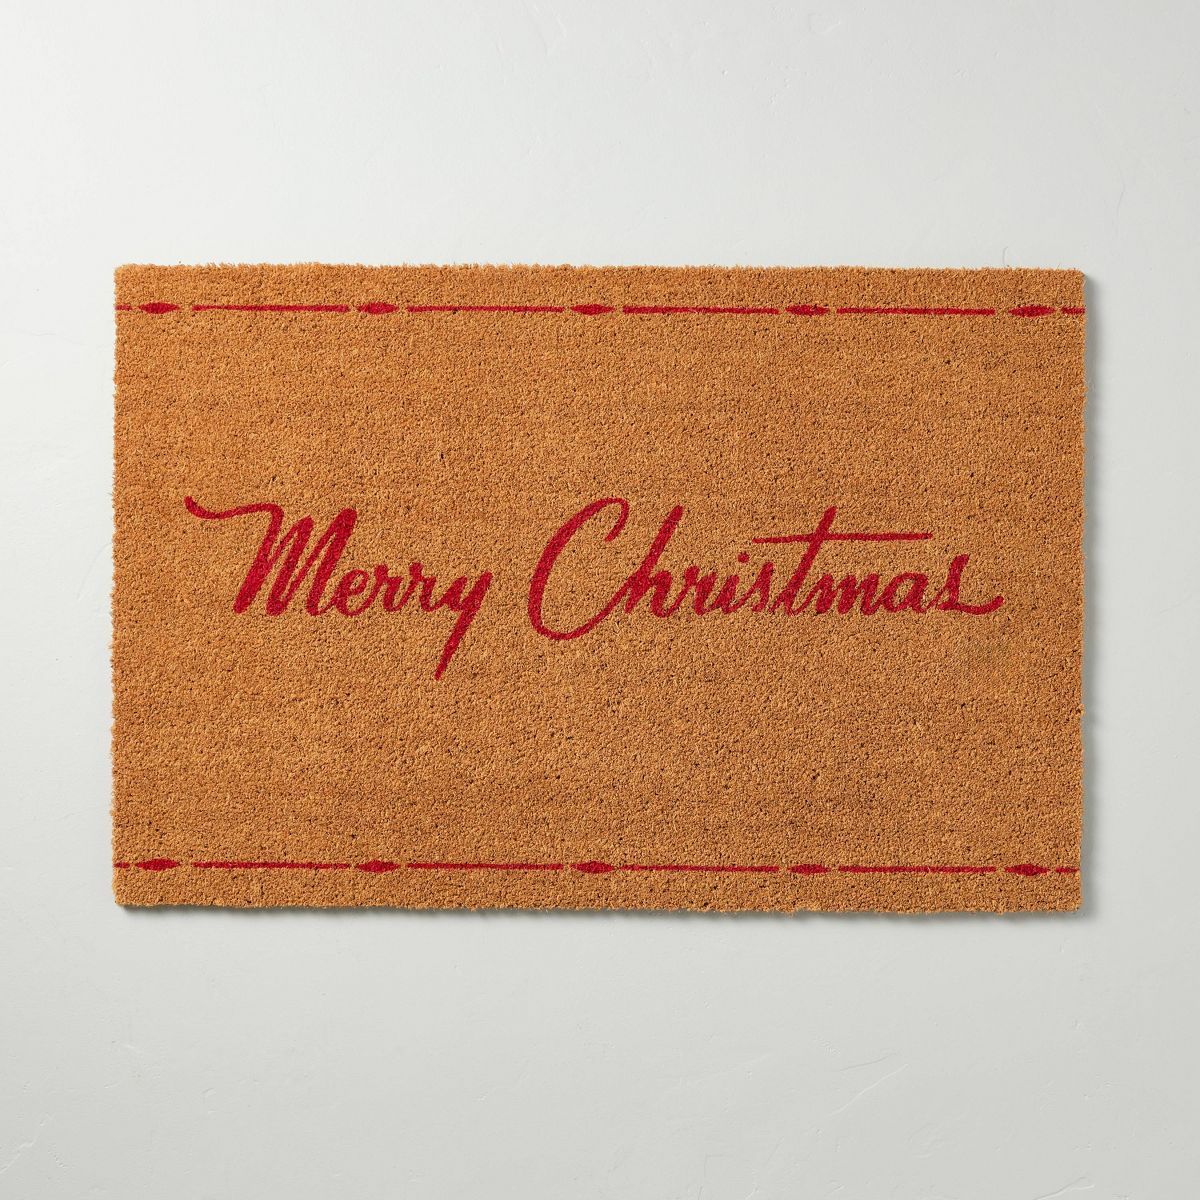 23"x35" Merry Christmas Coir Doormat Tan/Red - Hearth & Hand™ with Magnolia | Target